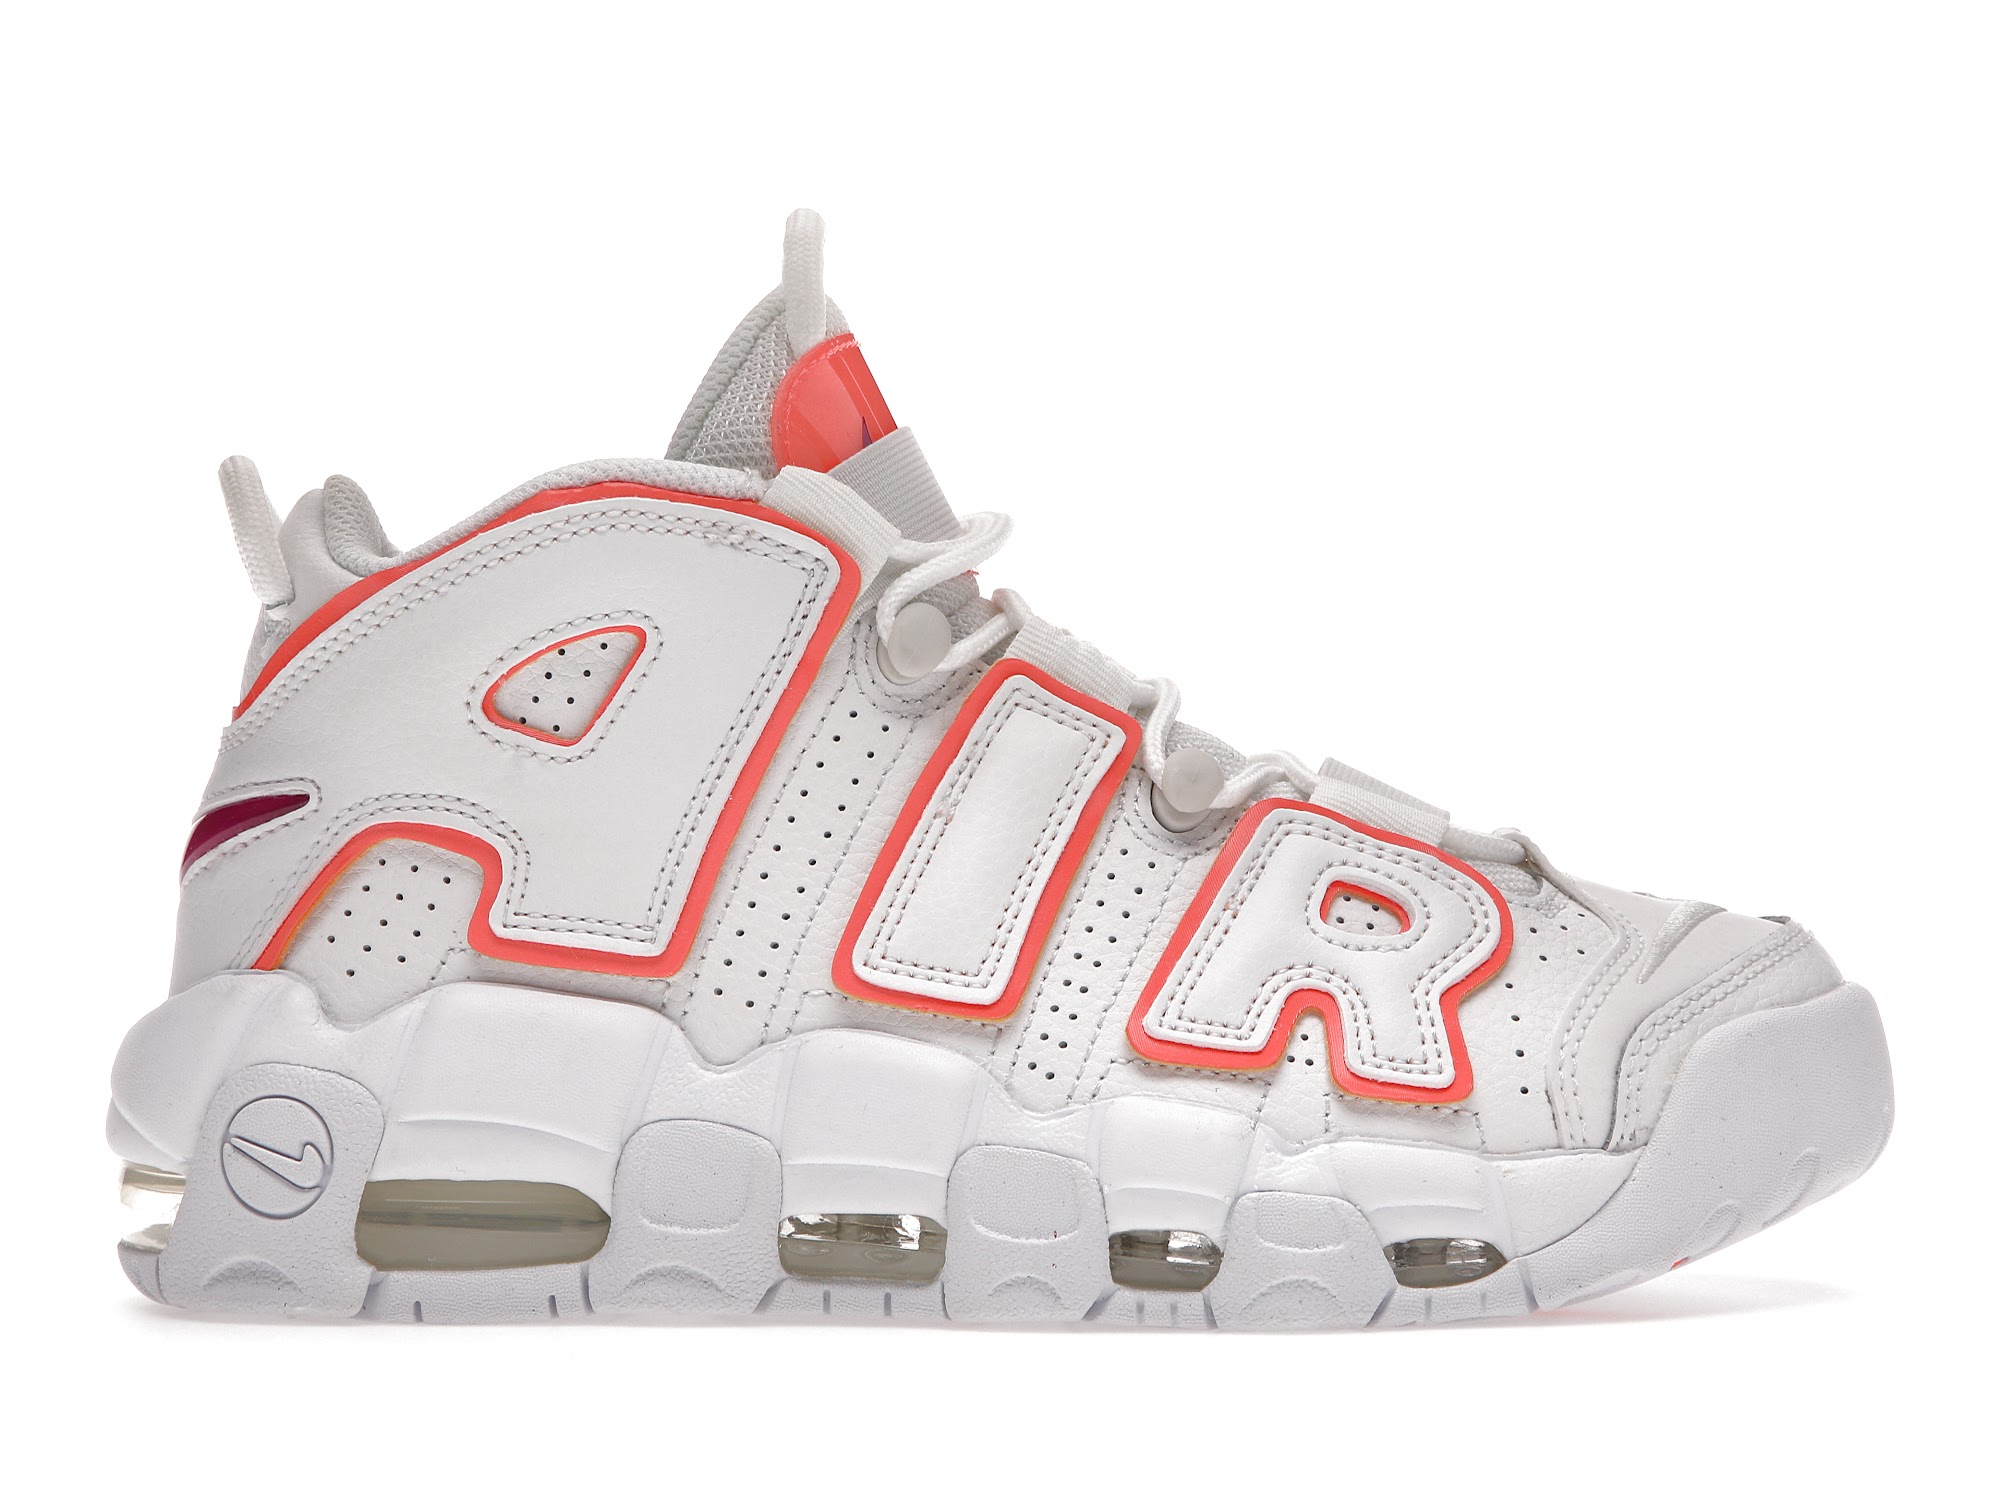 Nike Air More Uptempo Sunset (Women's) - DH4968-100 - US